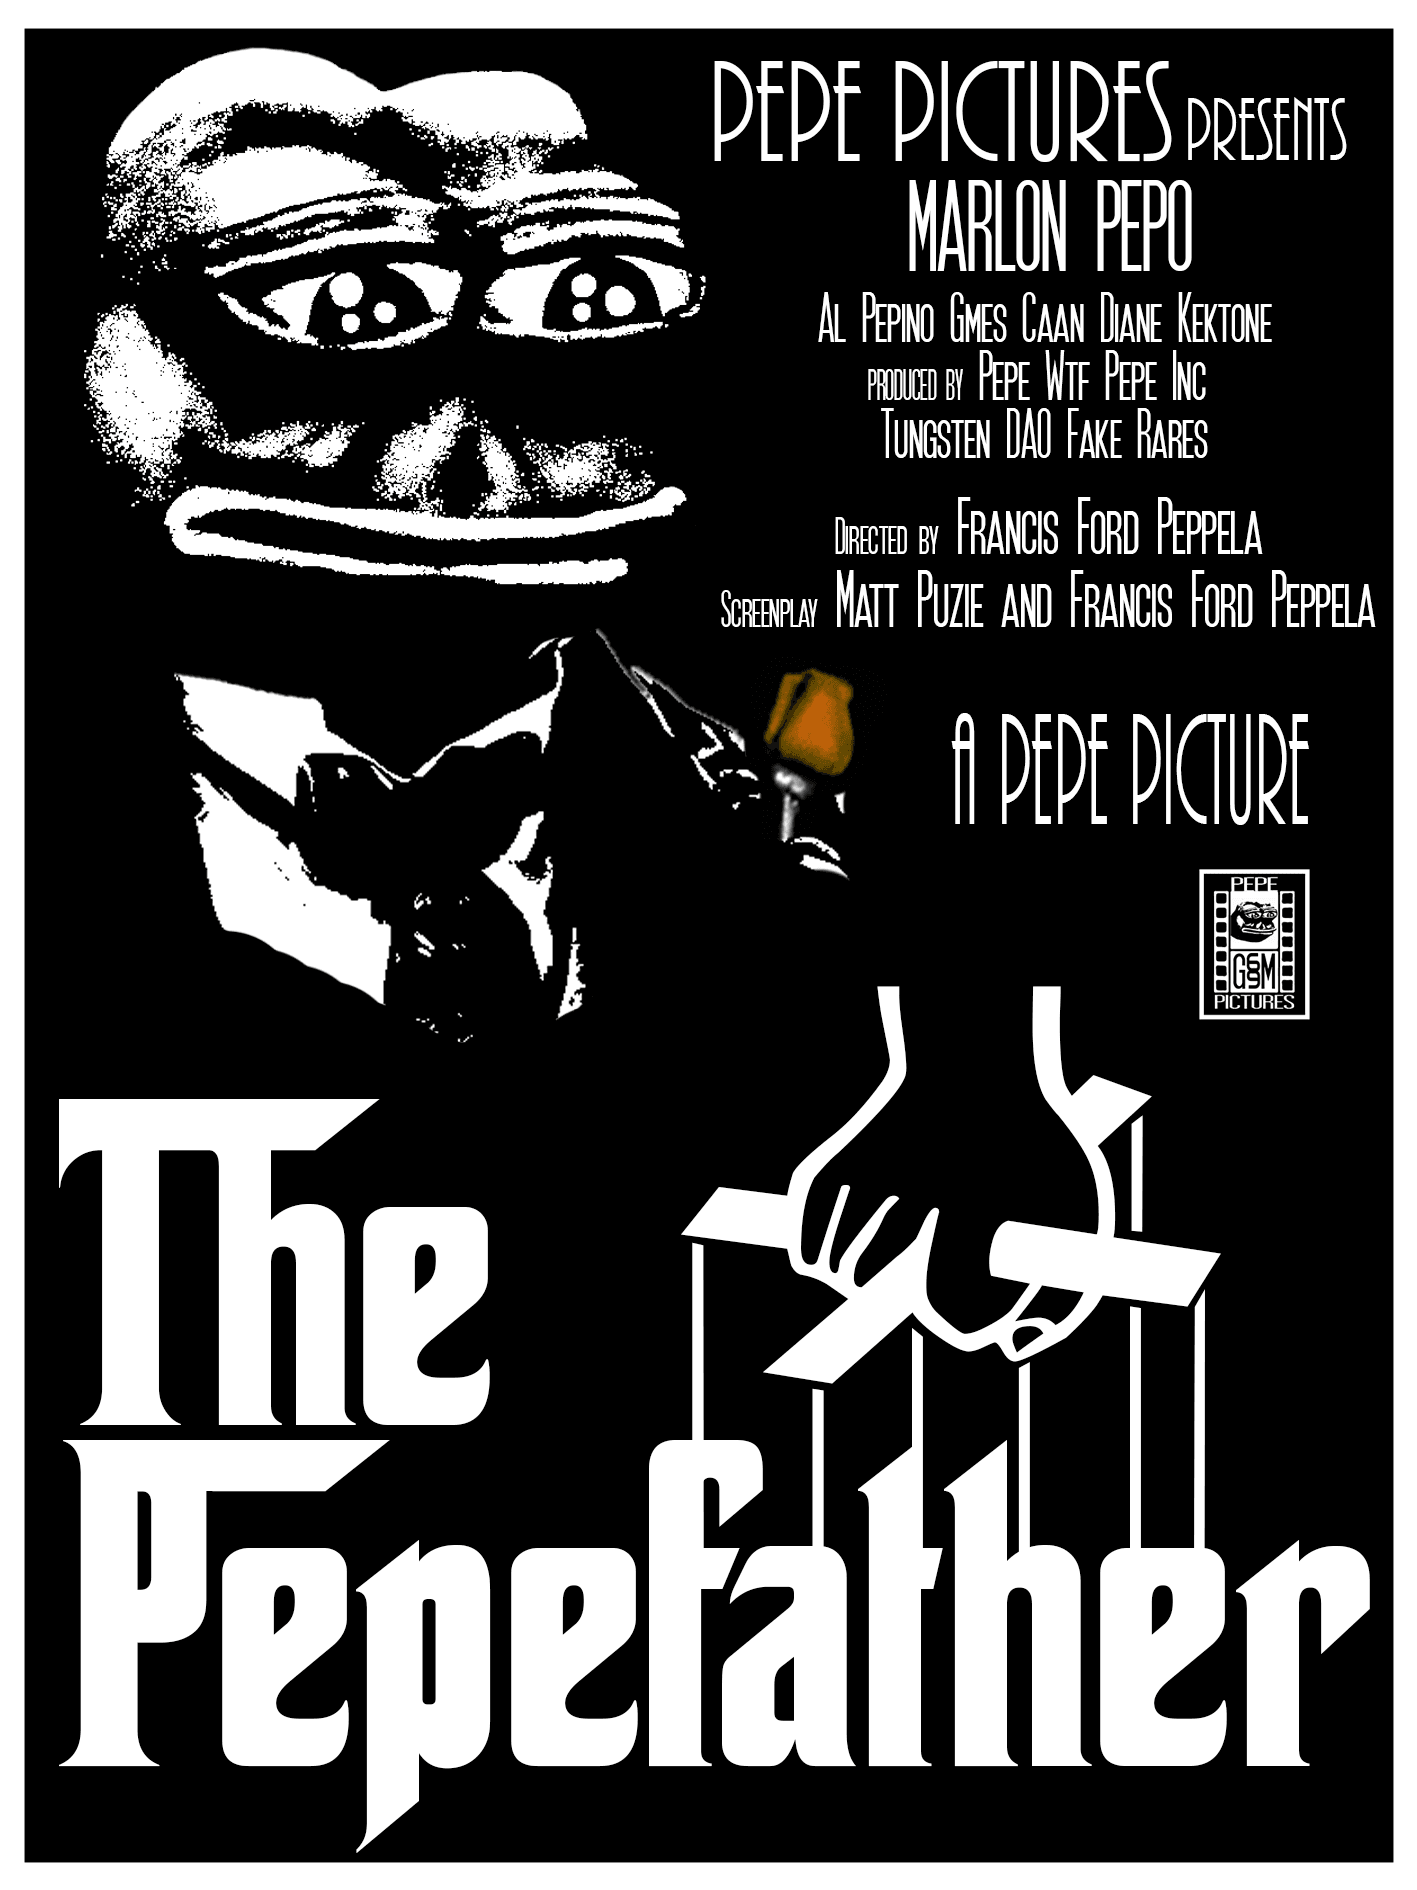 The Pepefather